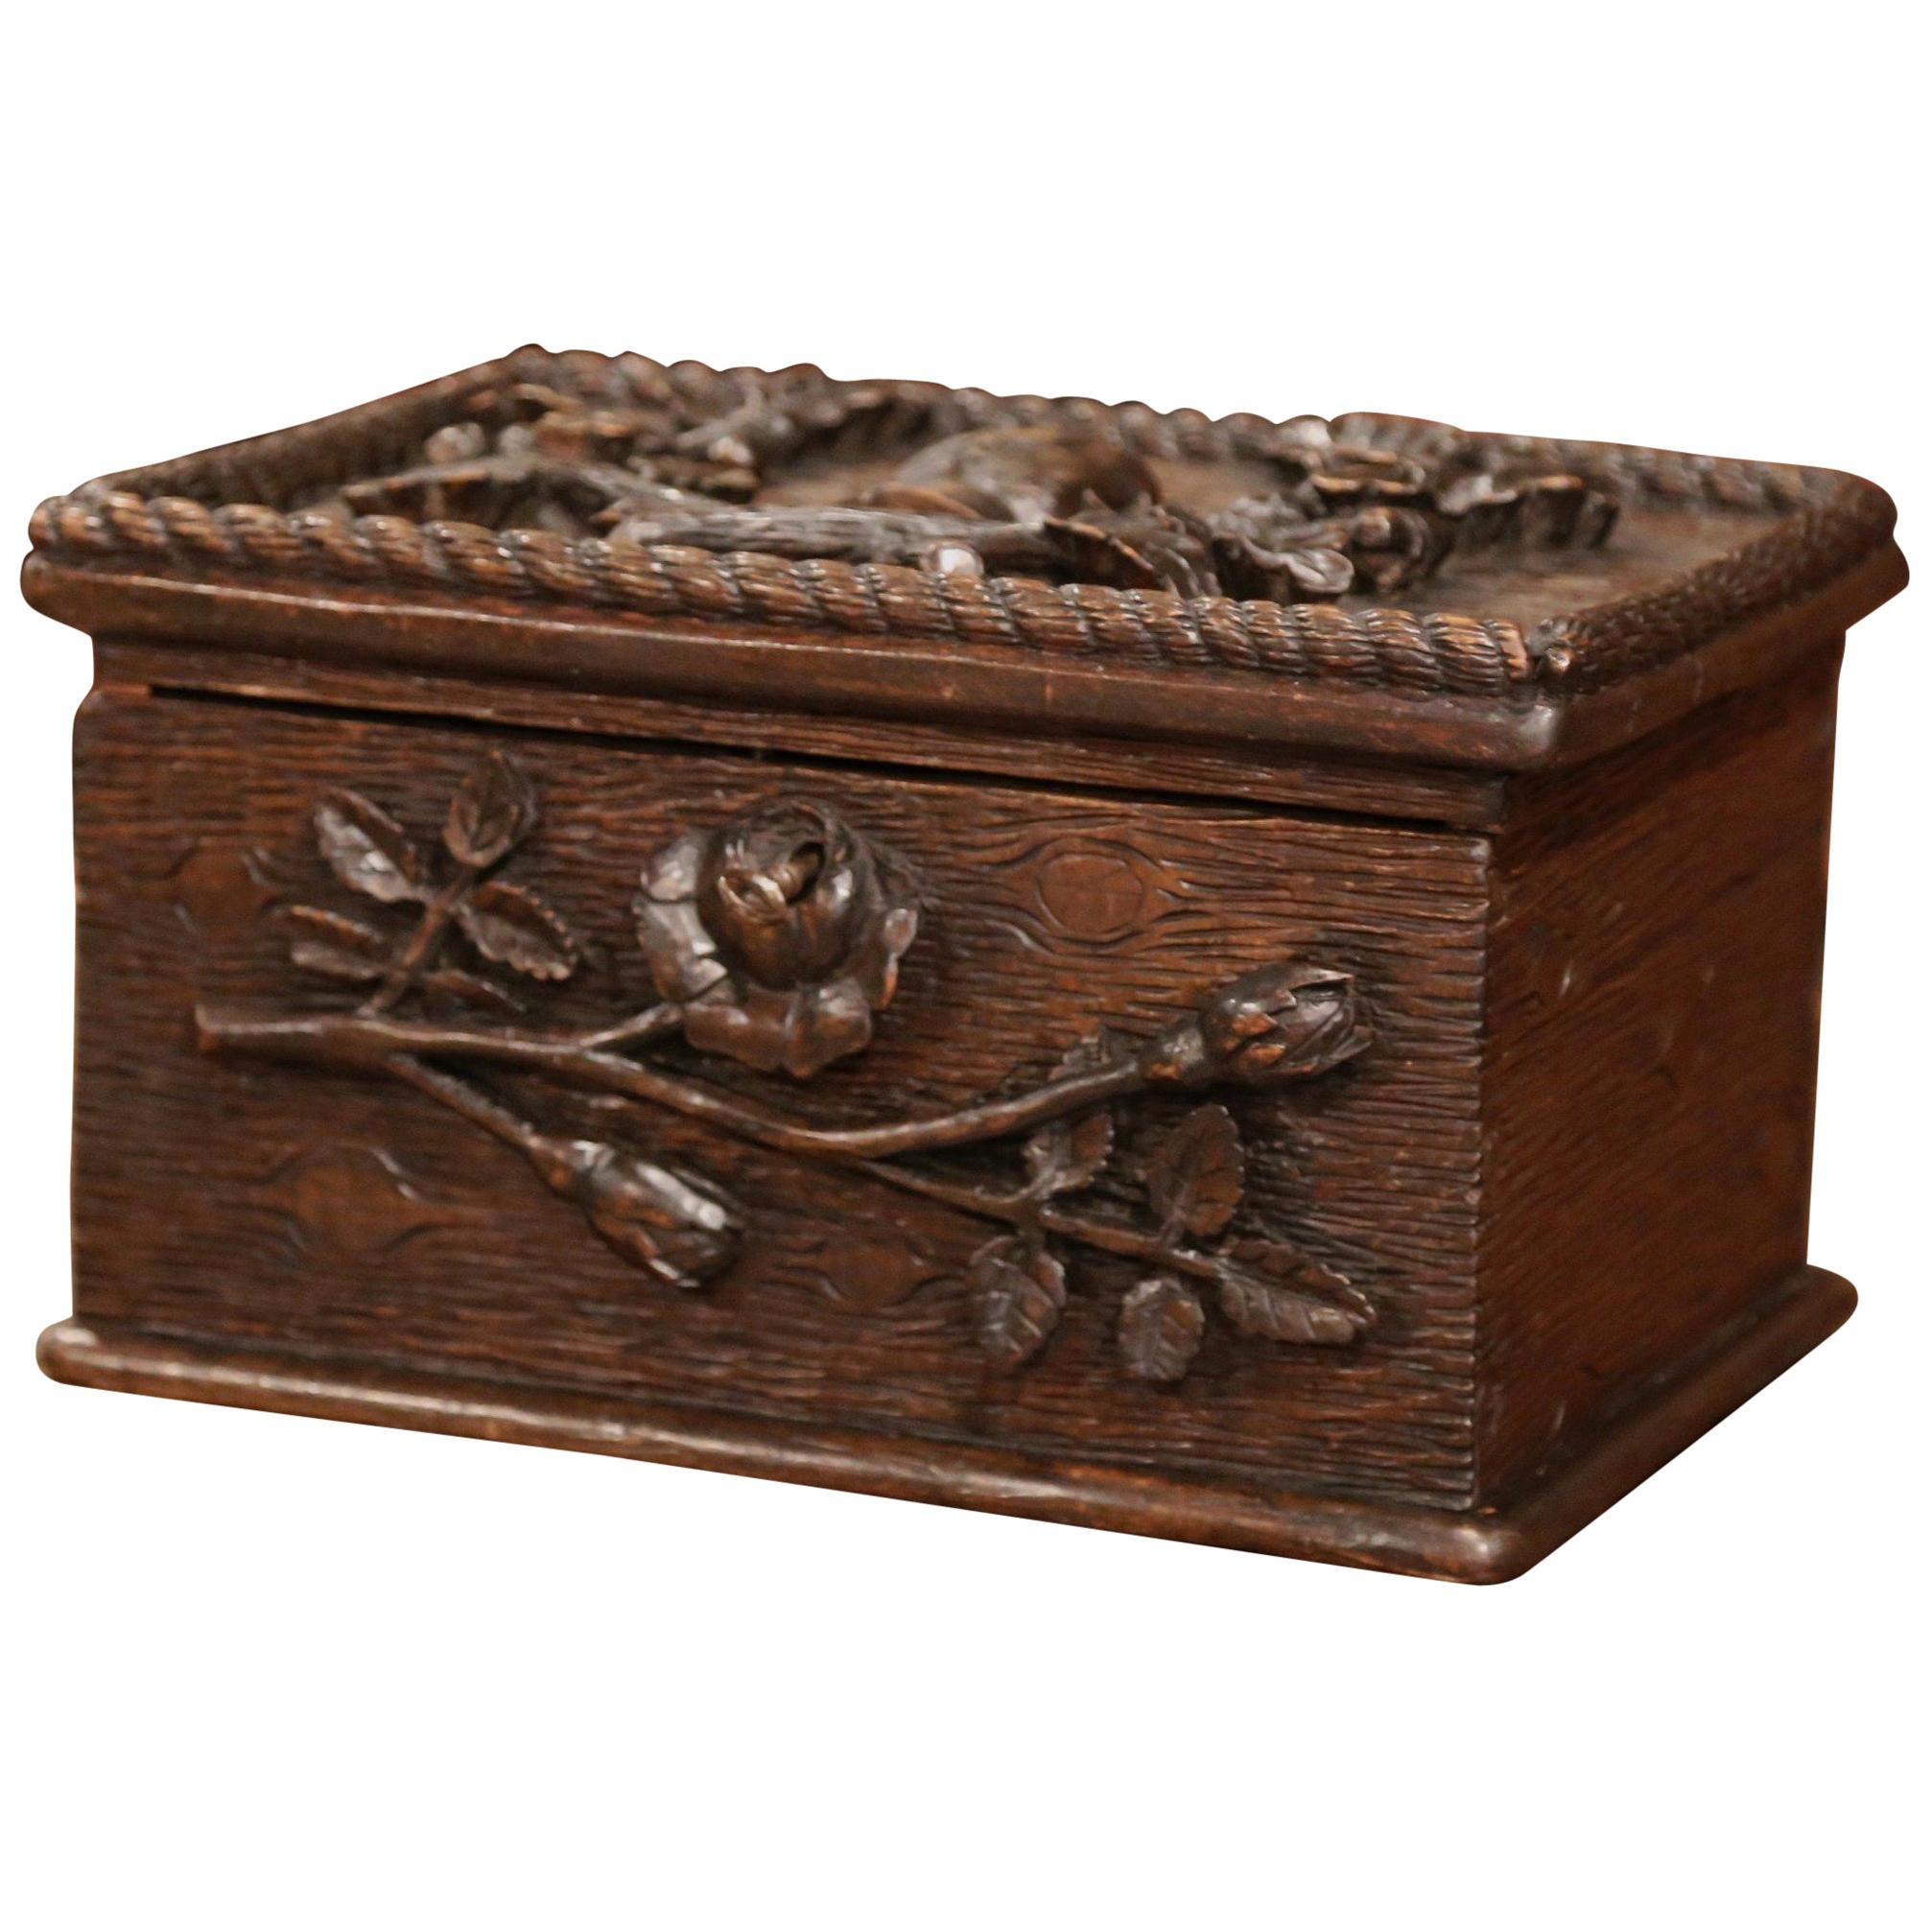 19th Century French Black Forest Carved Oak Letter Box with Foliage Decor